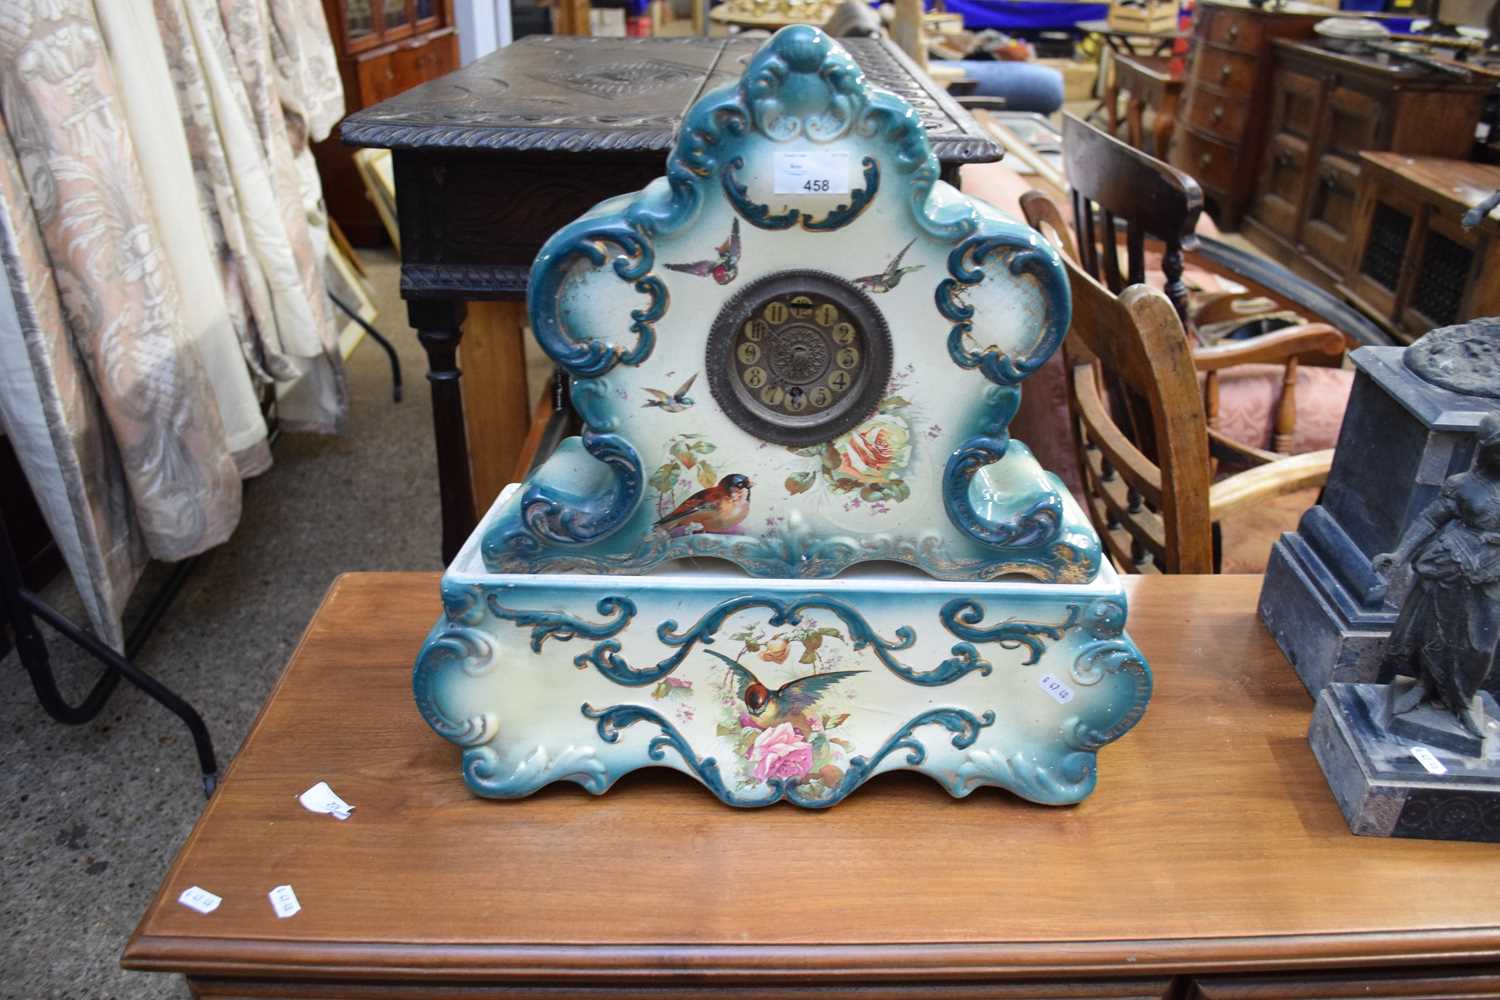 LATE 19TH/EARLY 20TH CENTURY CERAMIC CASED MANTEL CLOCK AND ACCOMPANYING STAND DECORATED WITH BIRDS,